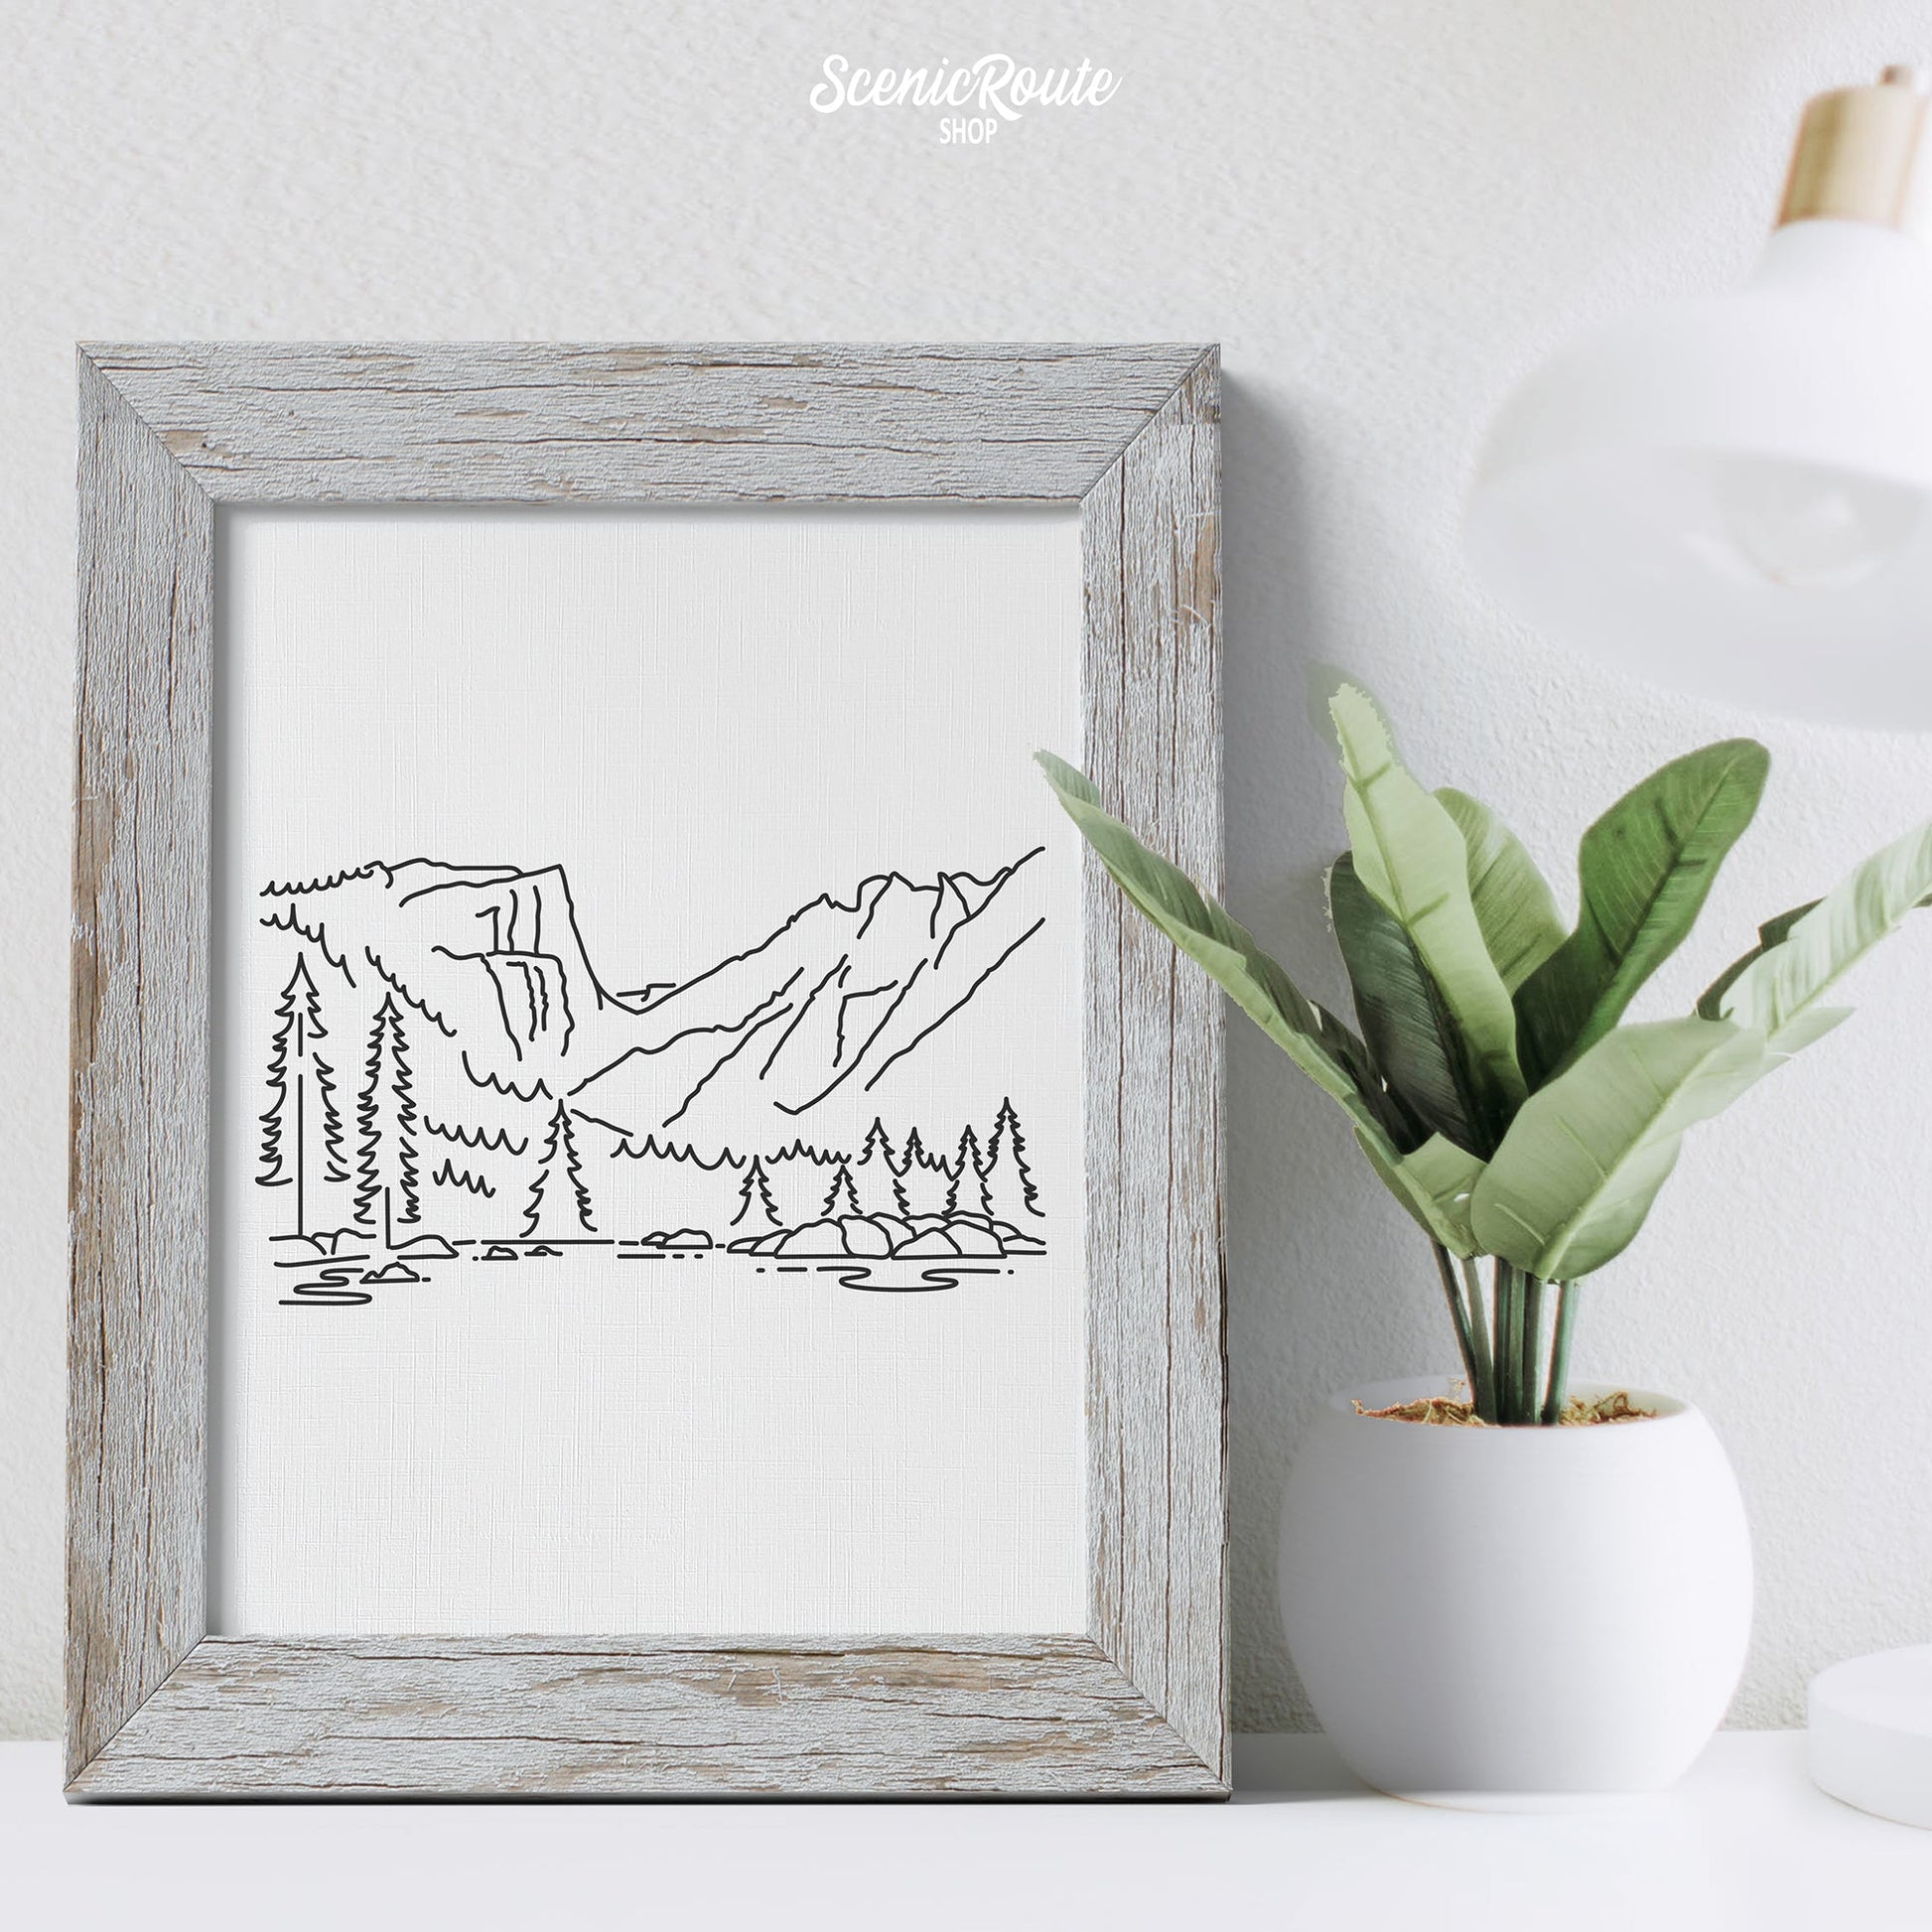 A framed line art drawing of Rocky Mountain National Park on a desk with a lamp and potted plant